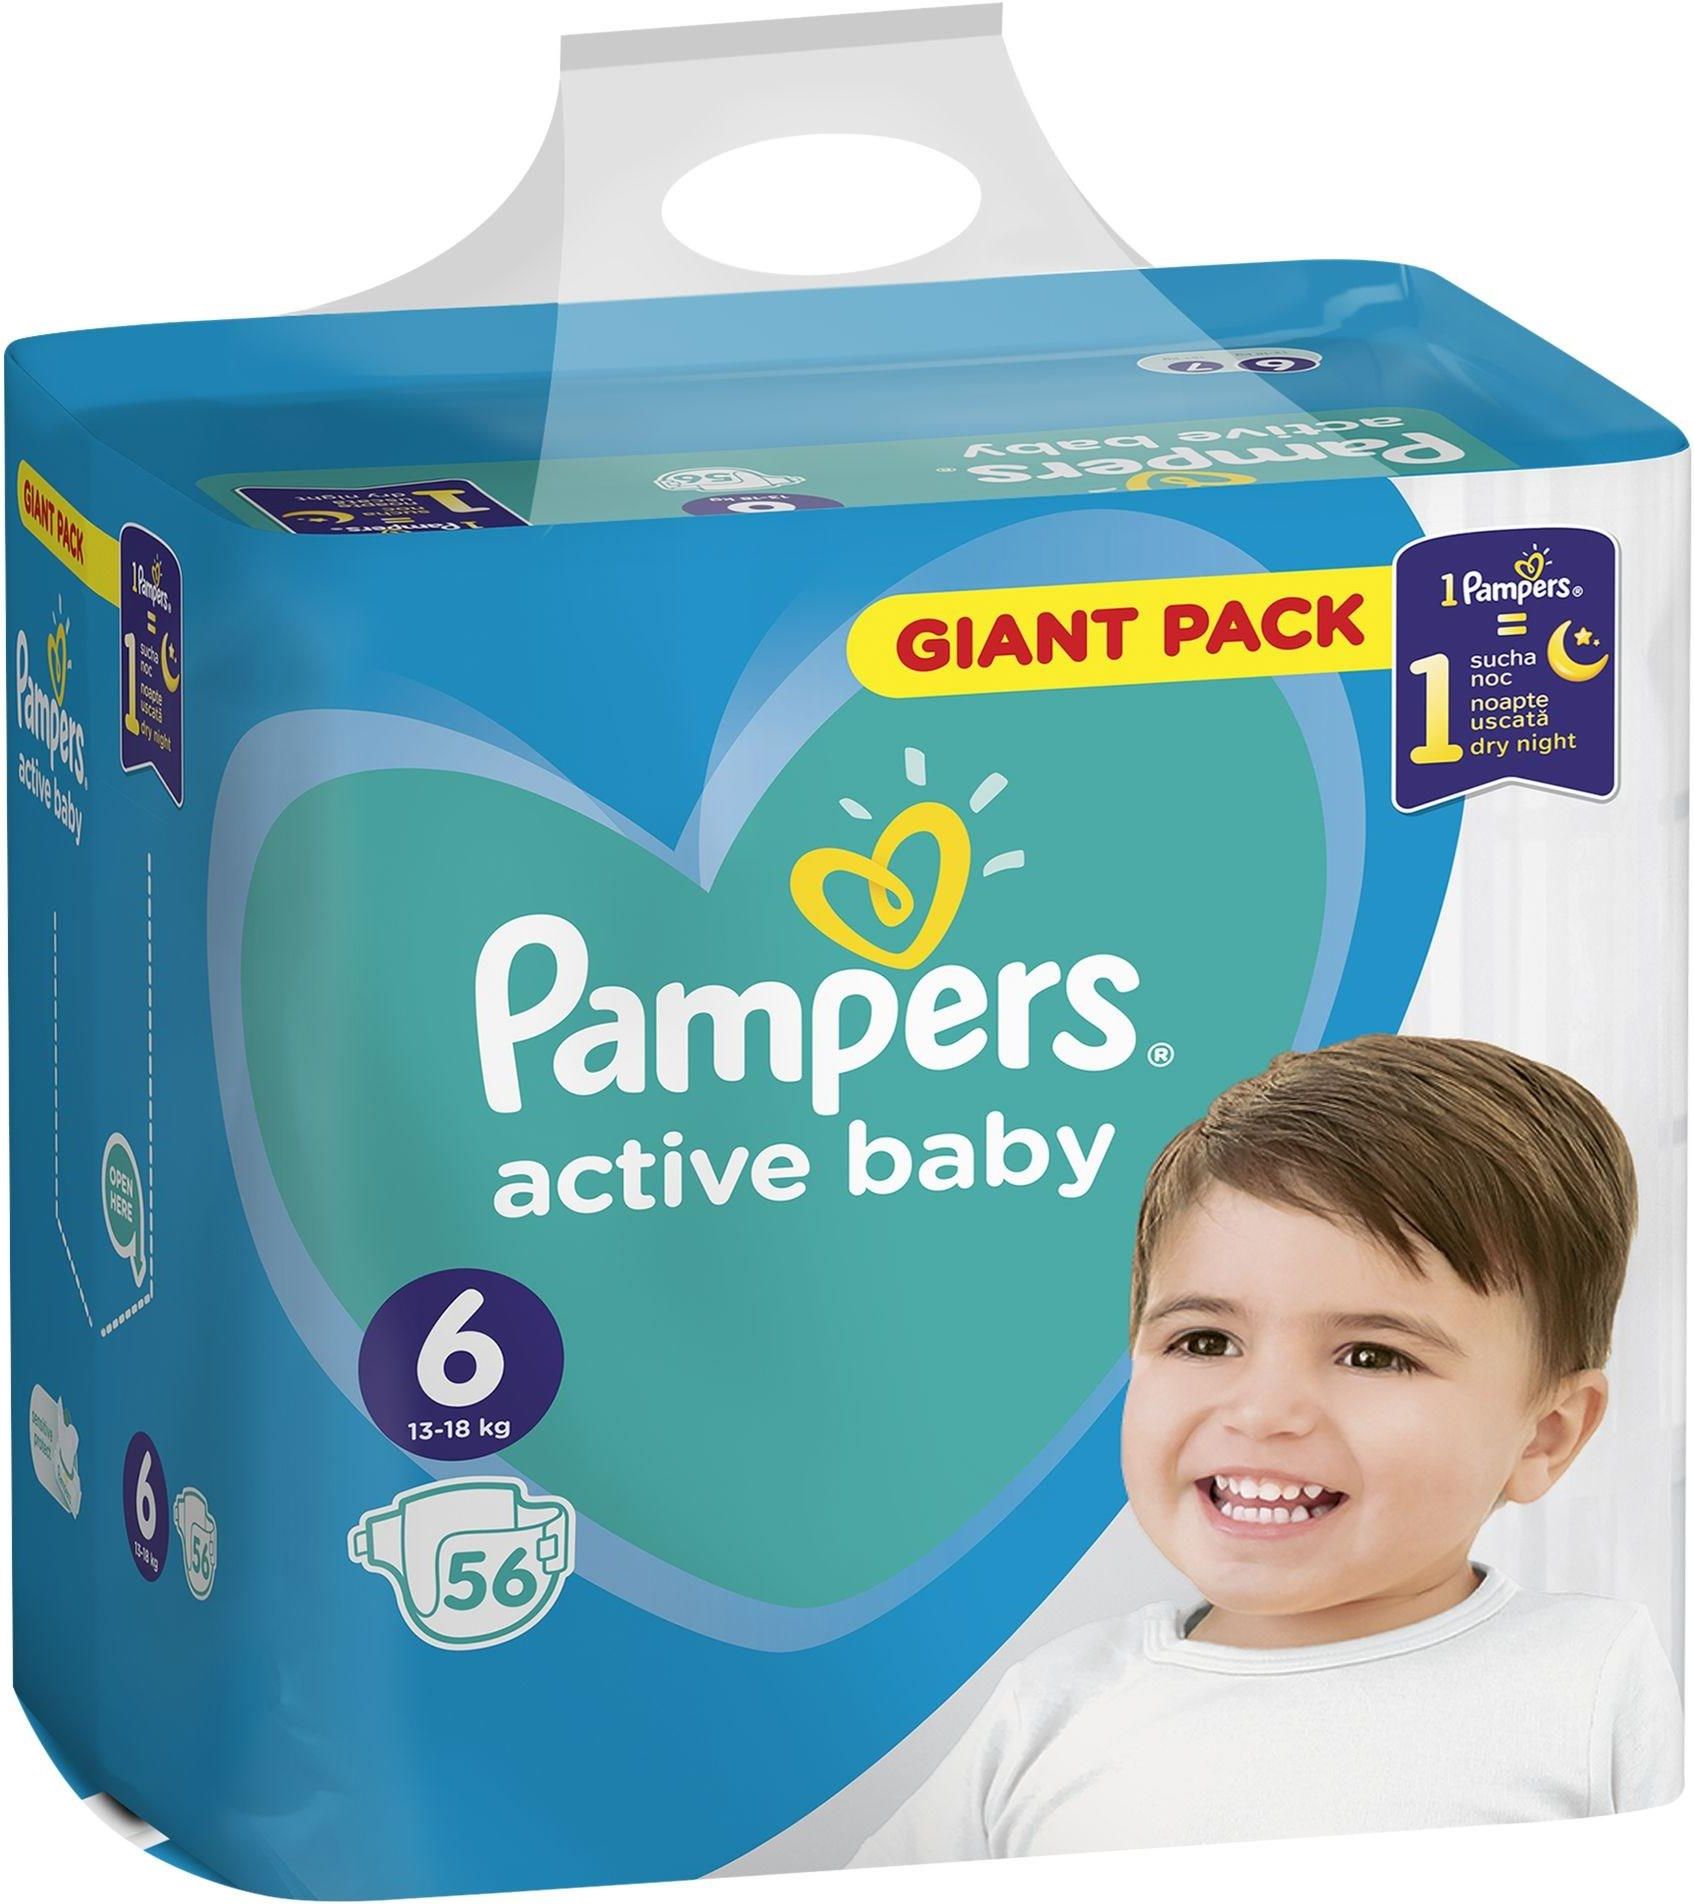 pampers active boy pants 6